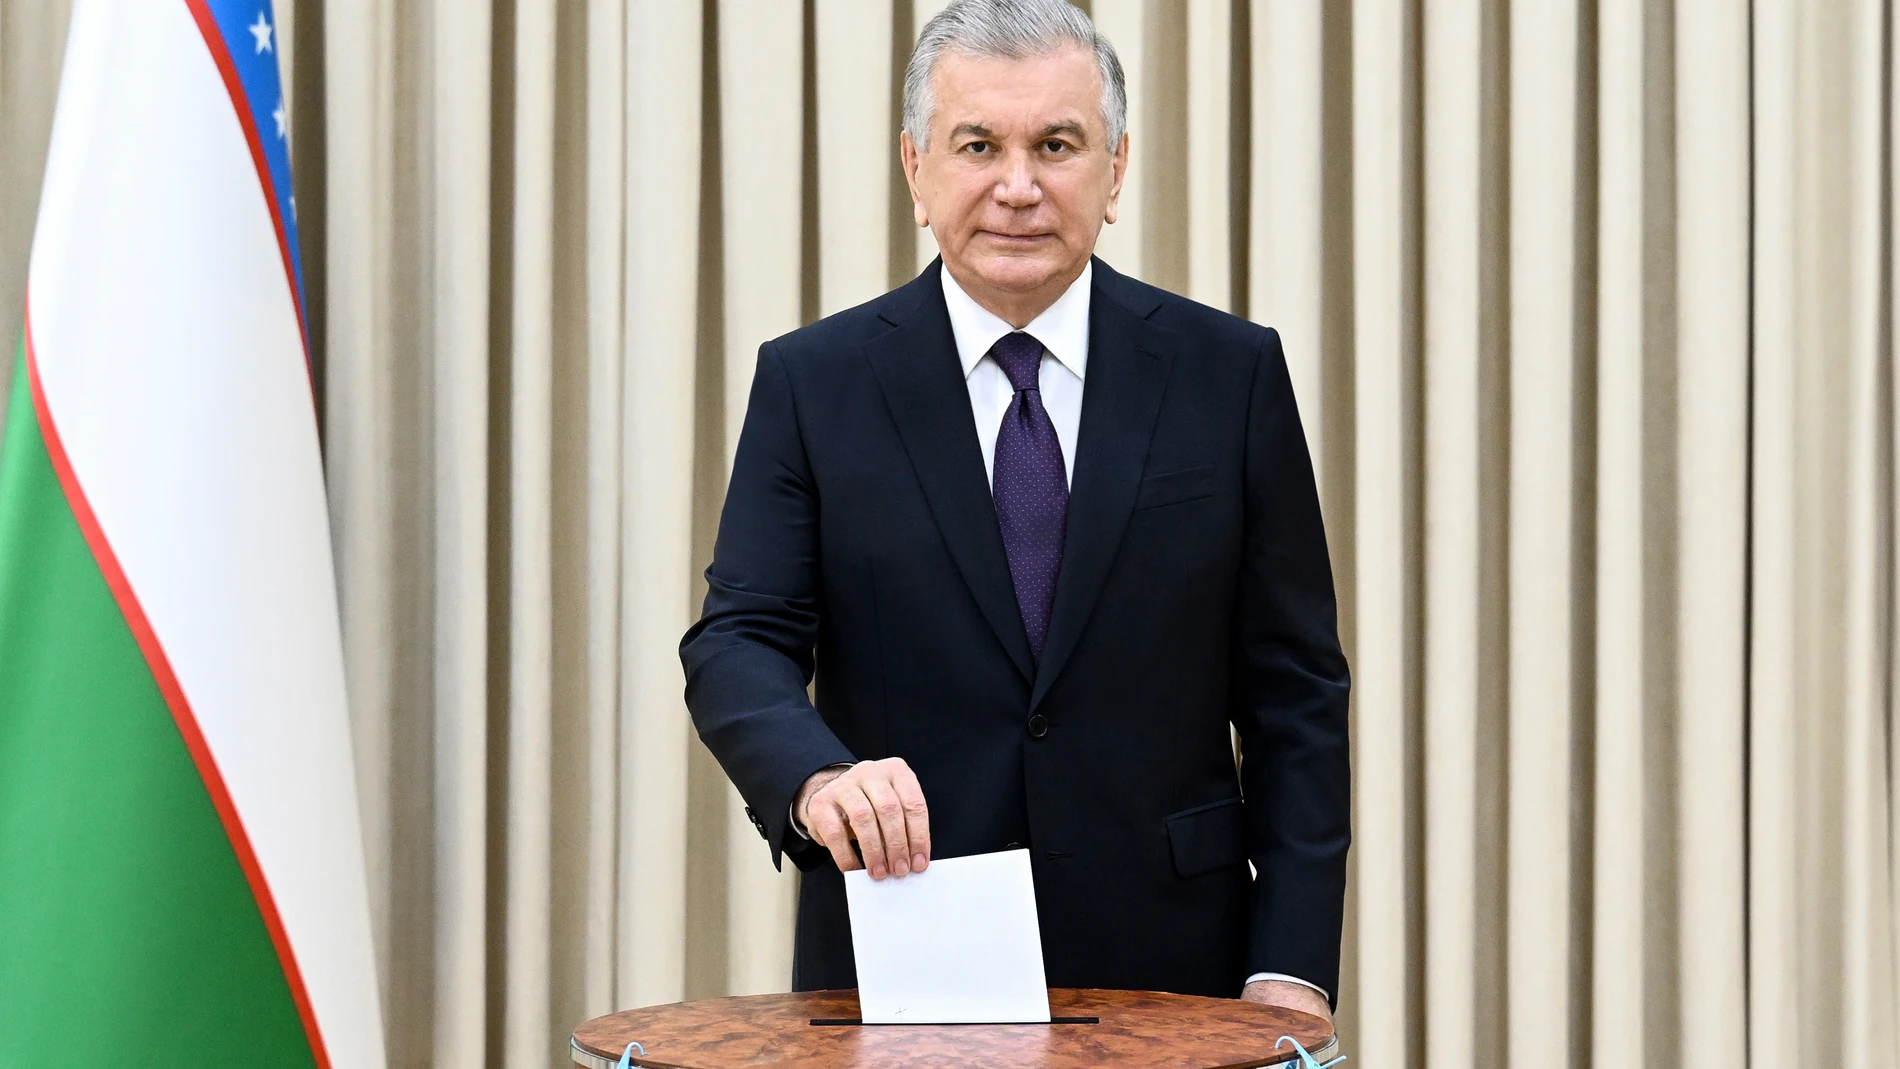 In this handout photo released by Uzbekistan's Presidential Press Office, Uzbekistan's President Shavkat Mirziyoyev casts his ballot at a polling station during a referendum in Tashkent, Uzbekistan, Sunday, April 30, 2023. Voters in Uzbekistan are casting ballots in a referendum on a revised constitution that promises human rights reforms. But the reforms being voted on Sunday also would allow the country's president to stay in office until 2040.(Uzbekistan's Presidential Press Office via AP)